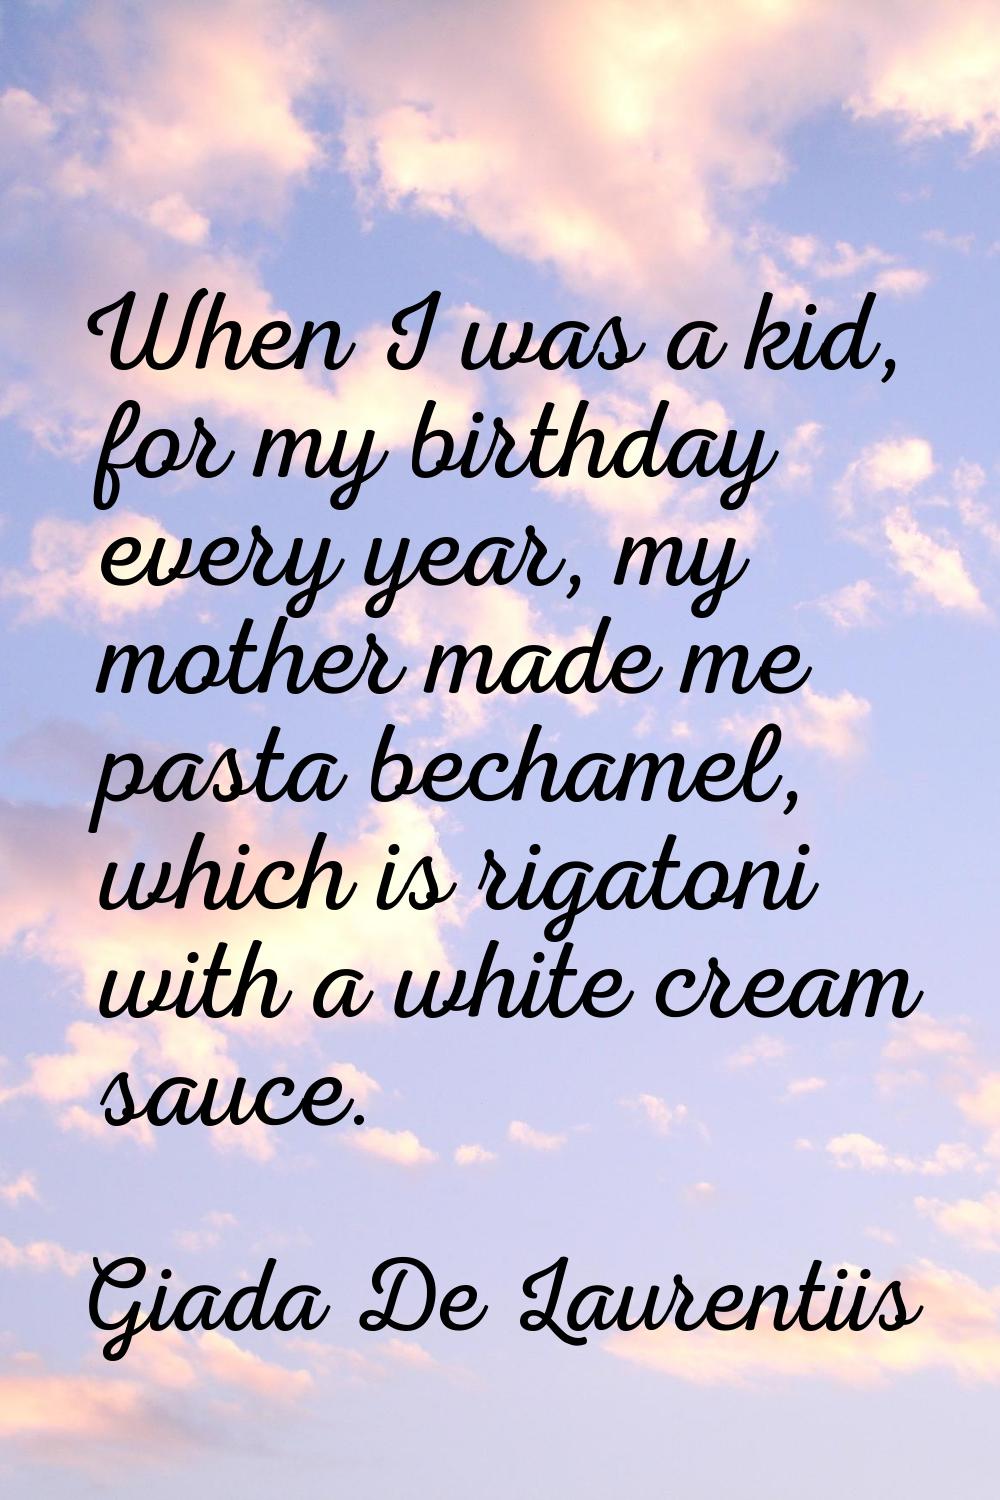 When I was a kid, for my birthday every year, my mother made me pasta bechamel, which is rigatoni w